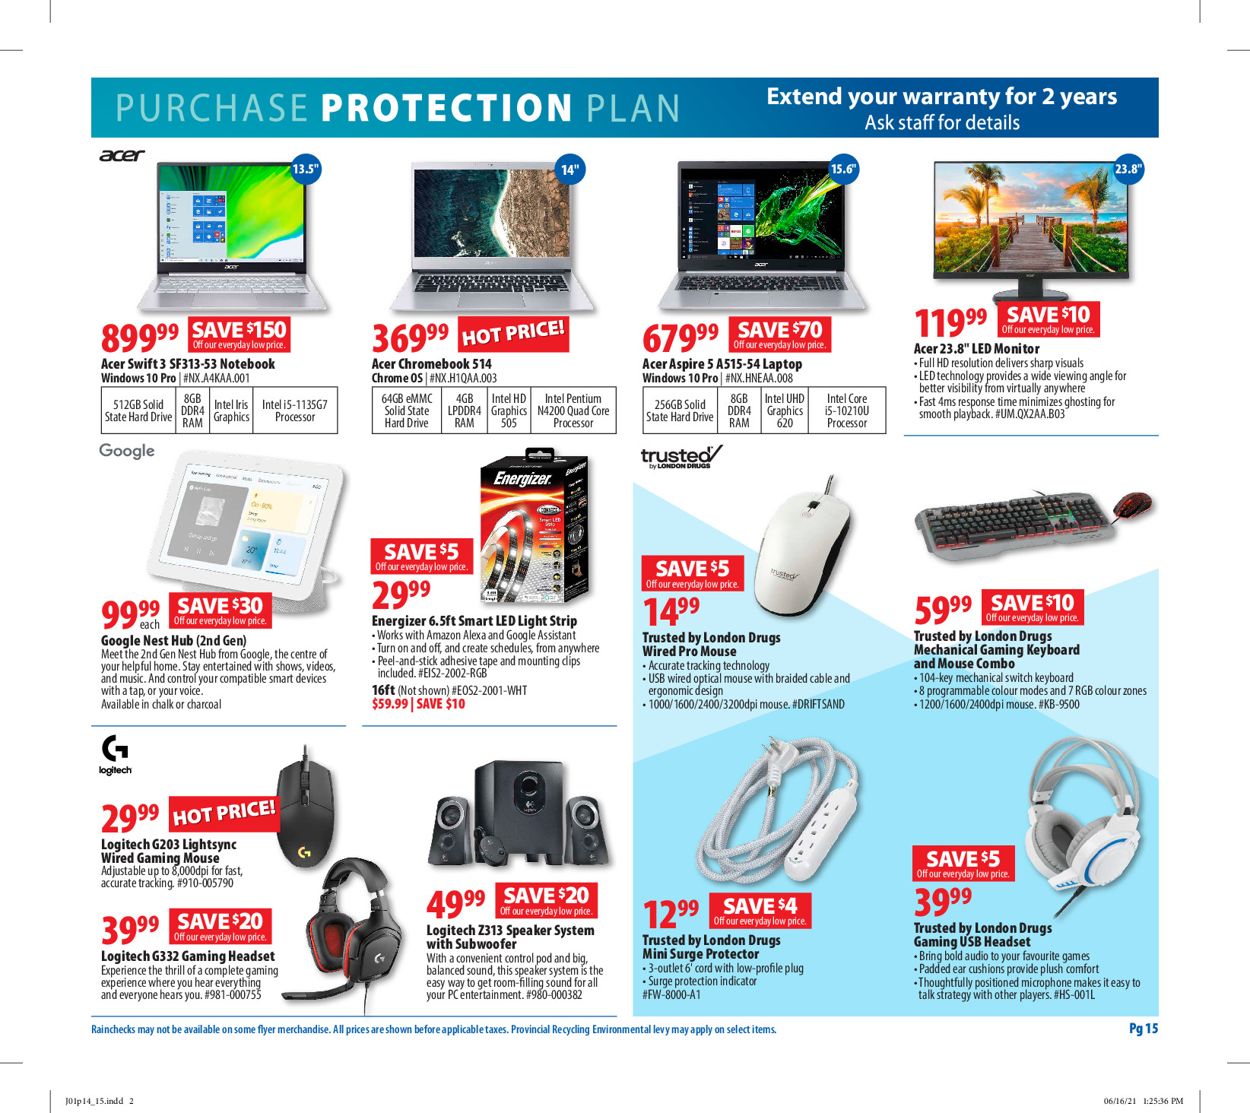 London Drugs Flyer from 07/01/2021